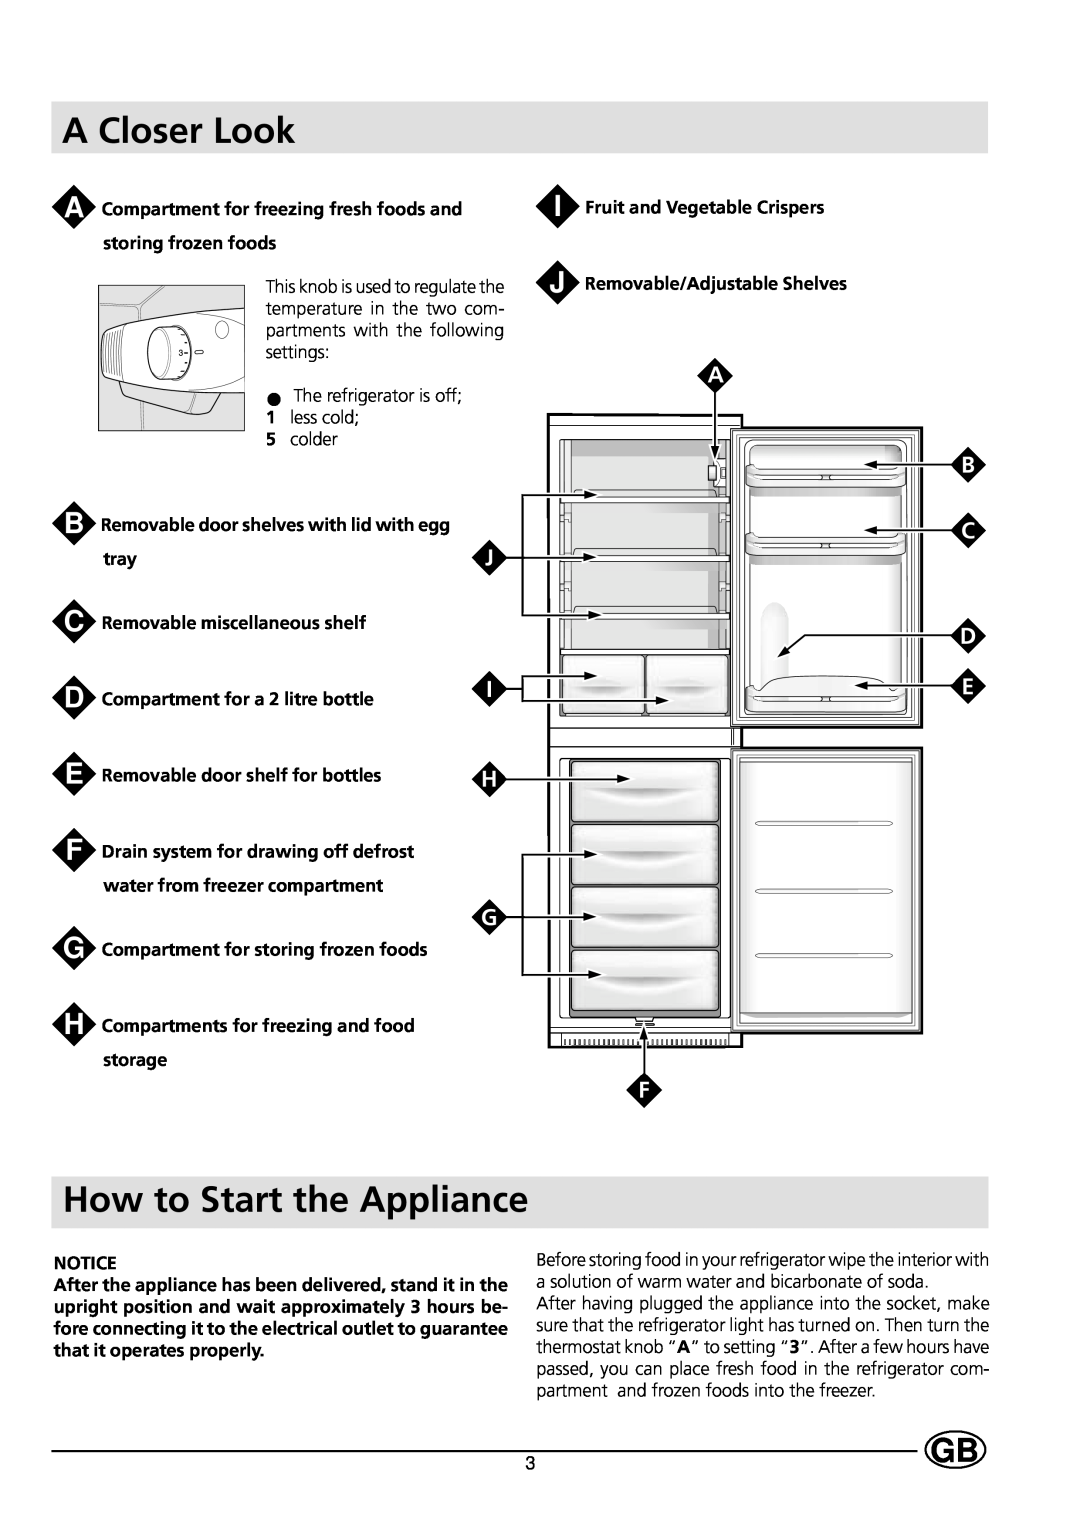 Indesit IN C 265 AI manual A Closer Look, How to Start the Appliance 